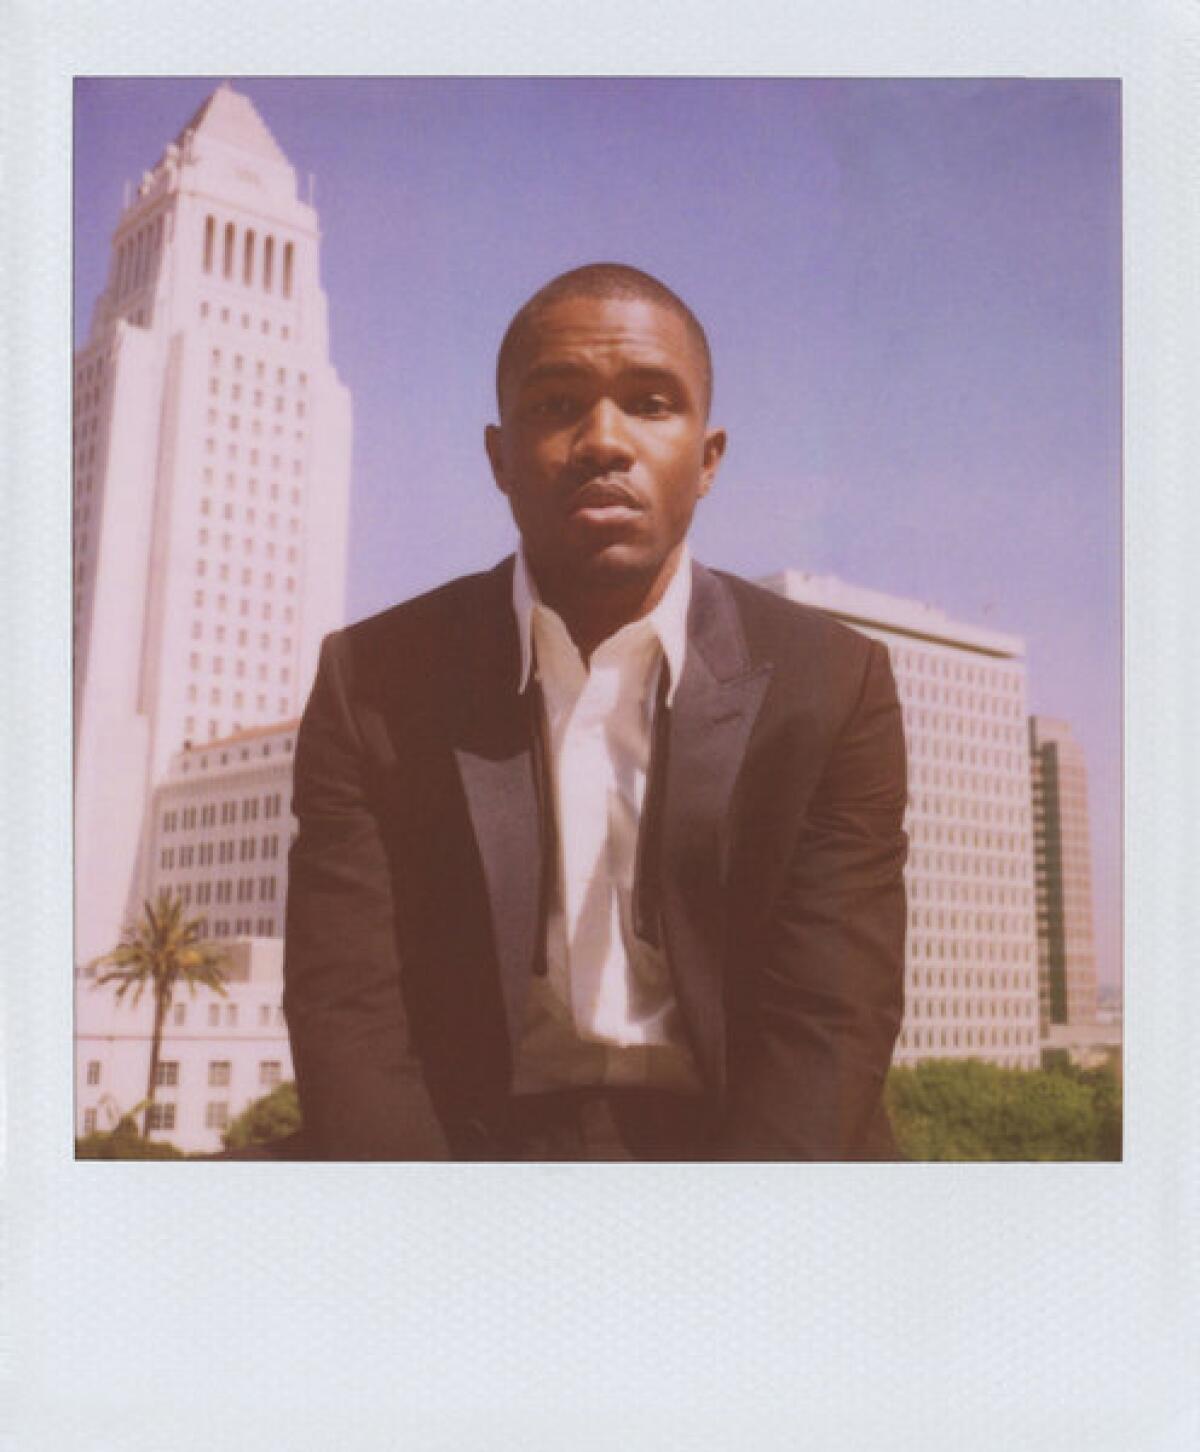 Singer and songwriter Frank Ocean was photographed at the Los Angeles Times building for the Band of Outsiders spring-summer 2013 campaign. City Hall is in the background.